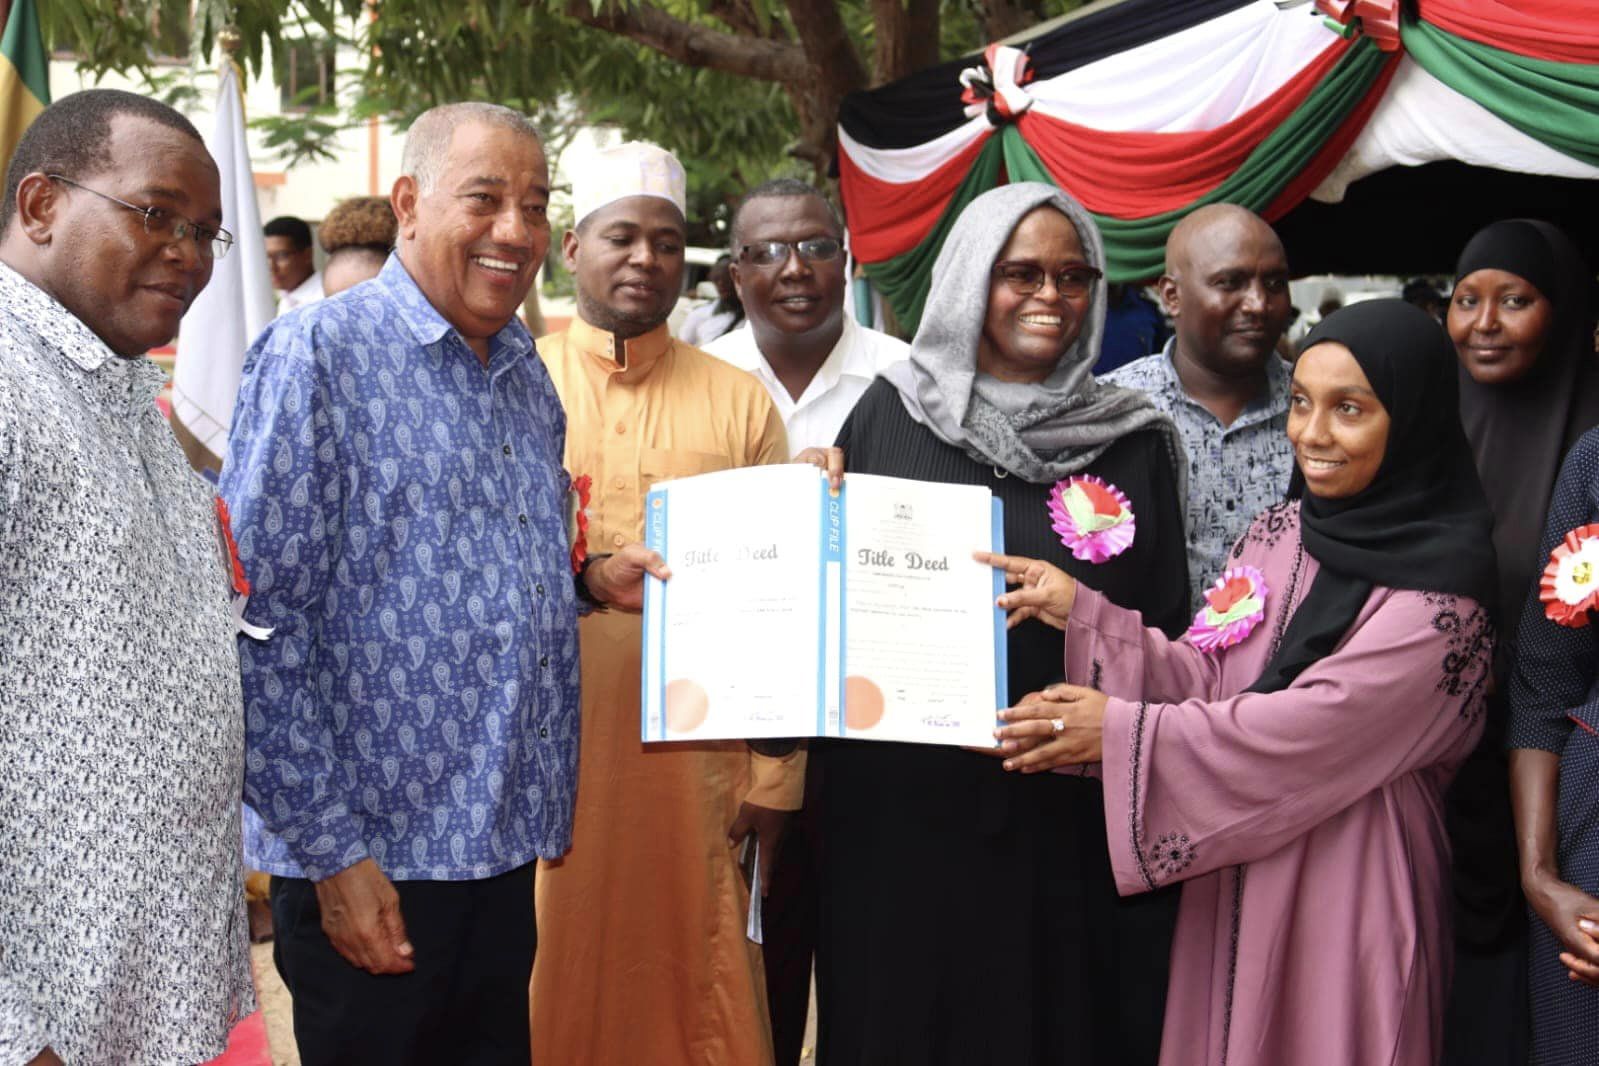 CHIEF JUSTICE KOOME RECEIVES TITLE DEEDS FROM GOVERNOR TIMAMY TO SET UP A HIGH COURT IN LAMU